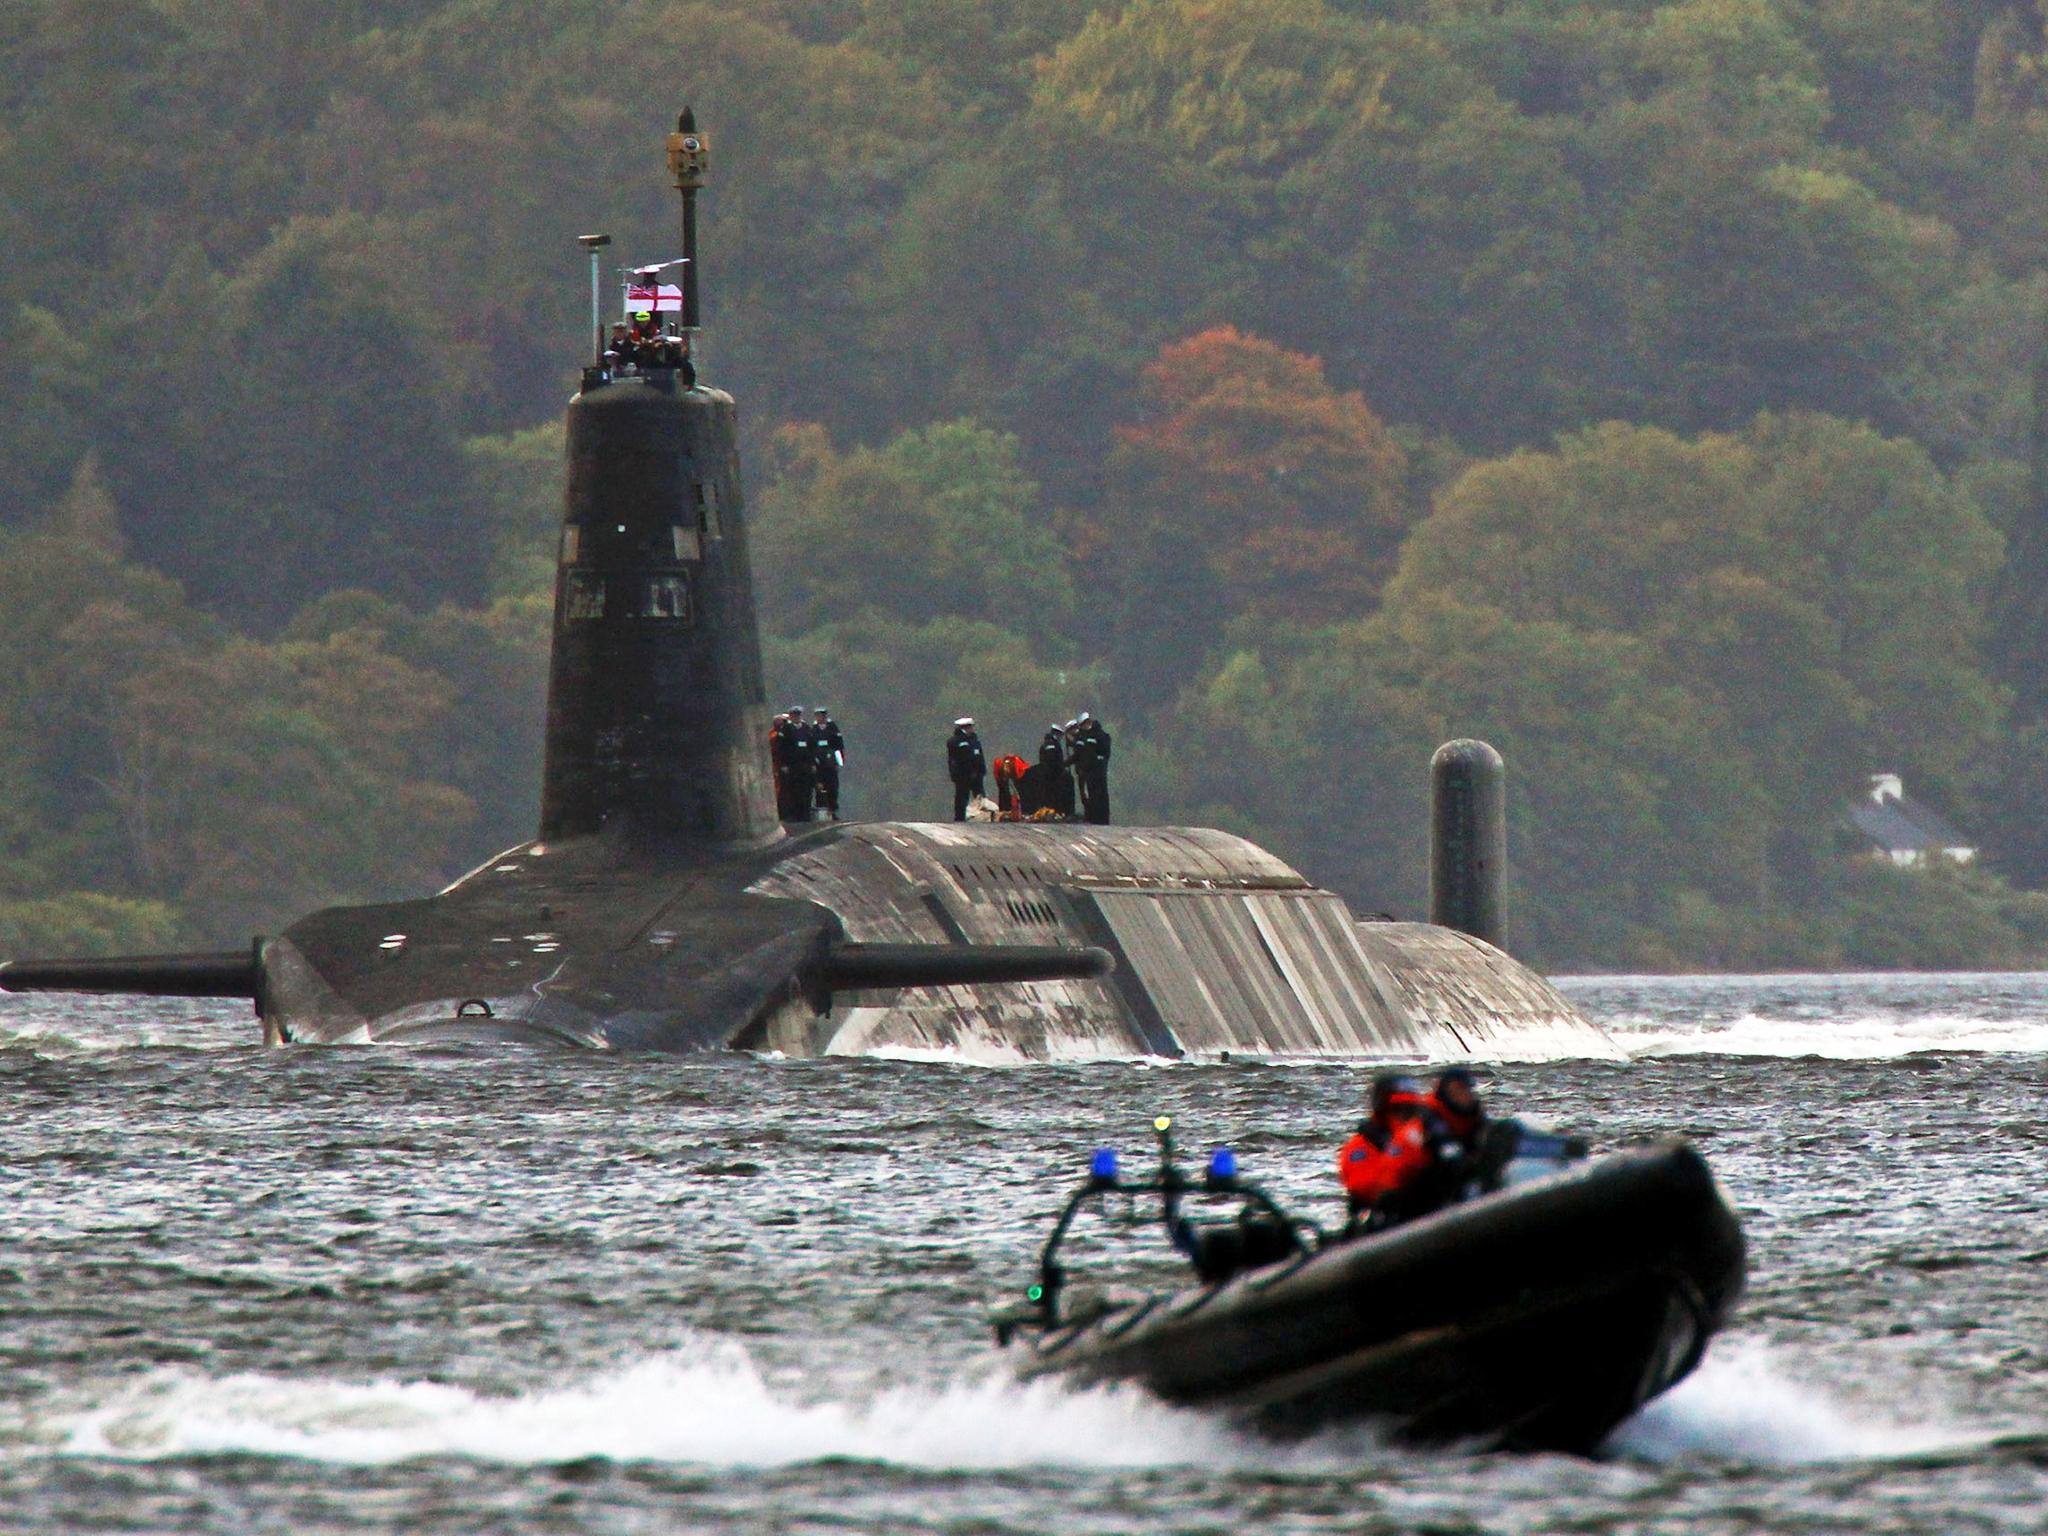 AWE is responsible for building and maintaining warheads of the UK’s Trident nuclear deterrent